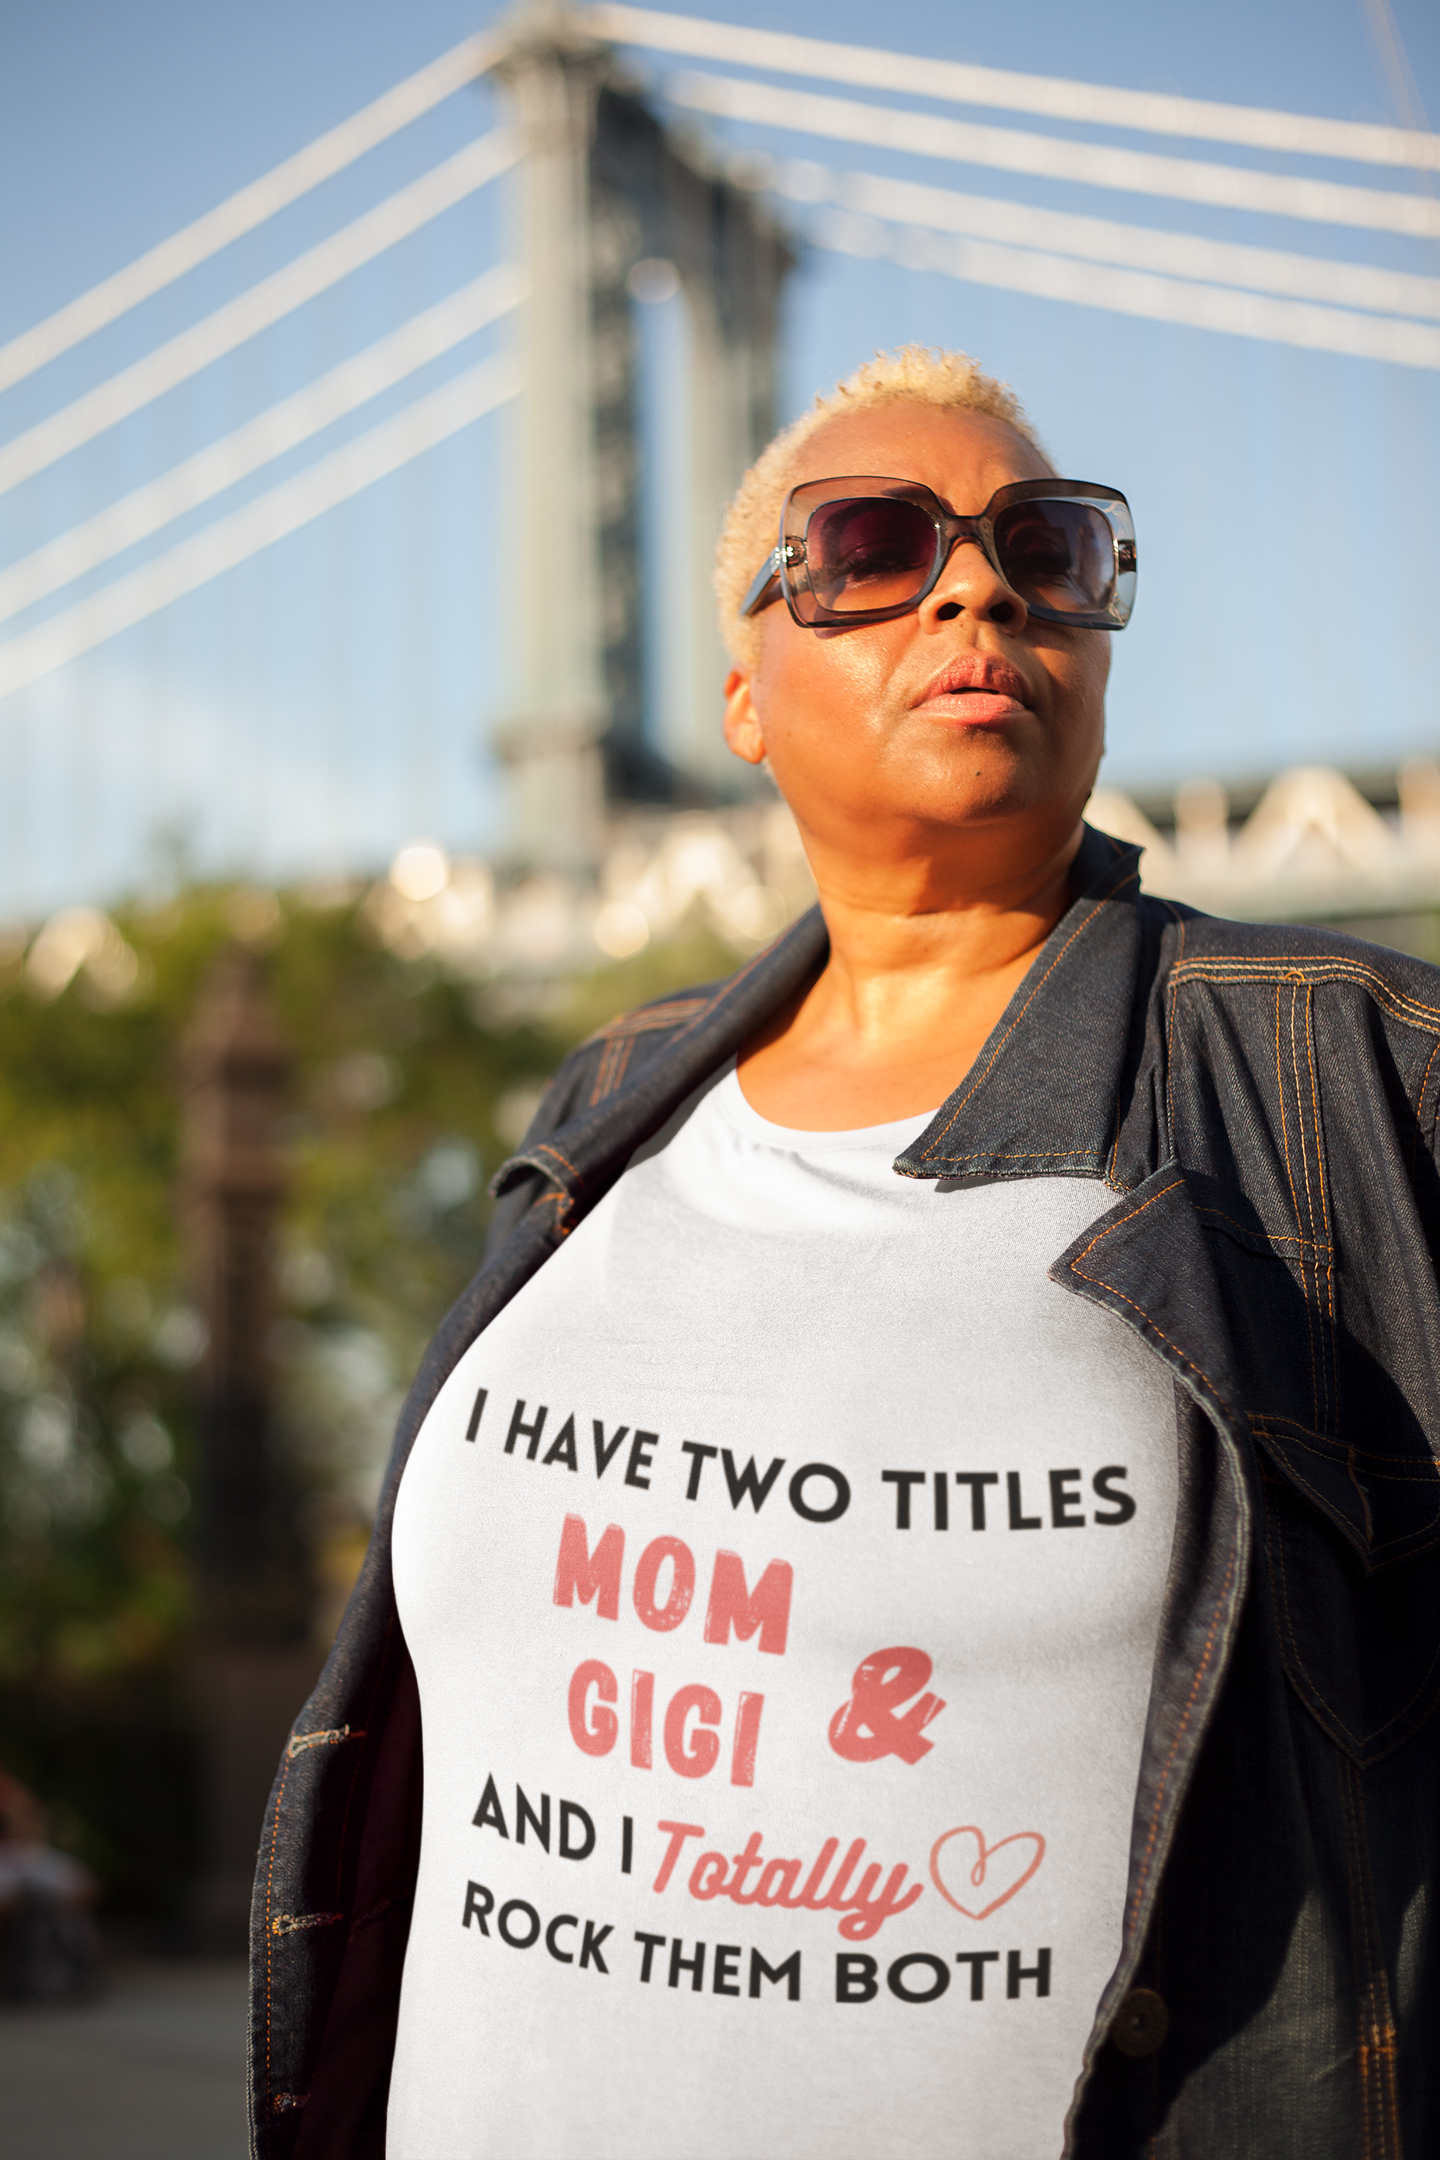 I-Have-Two-Titles-Mom-&-GiGi-and-I-Totally-Rock-Them-Both-T-shirt